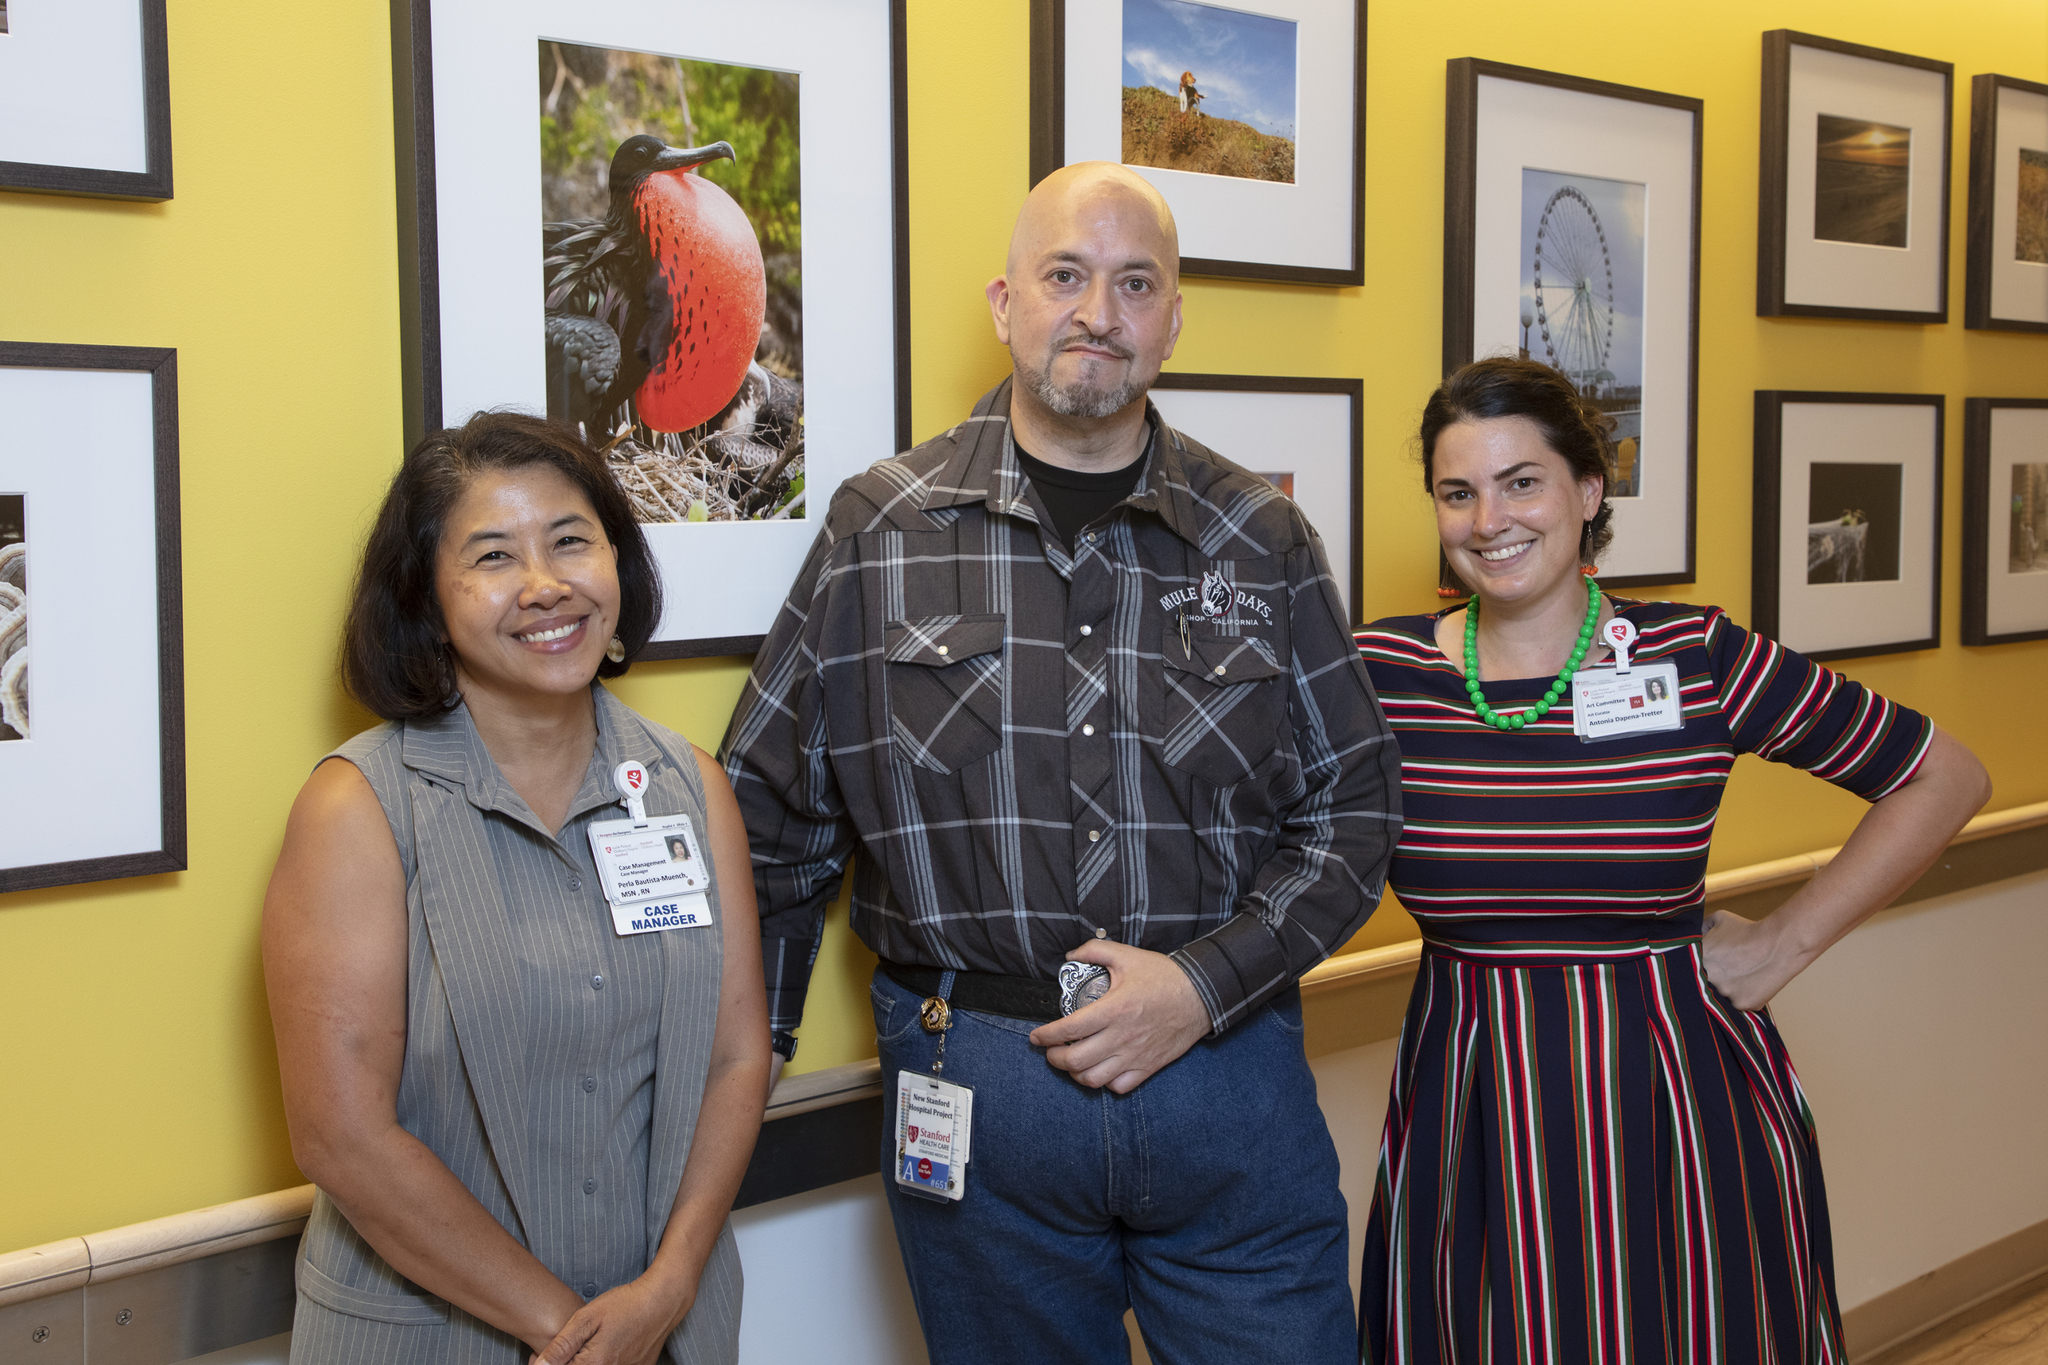 Packard Children's Annual Employee Photography Display